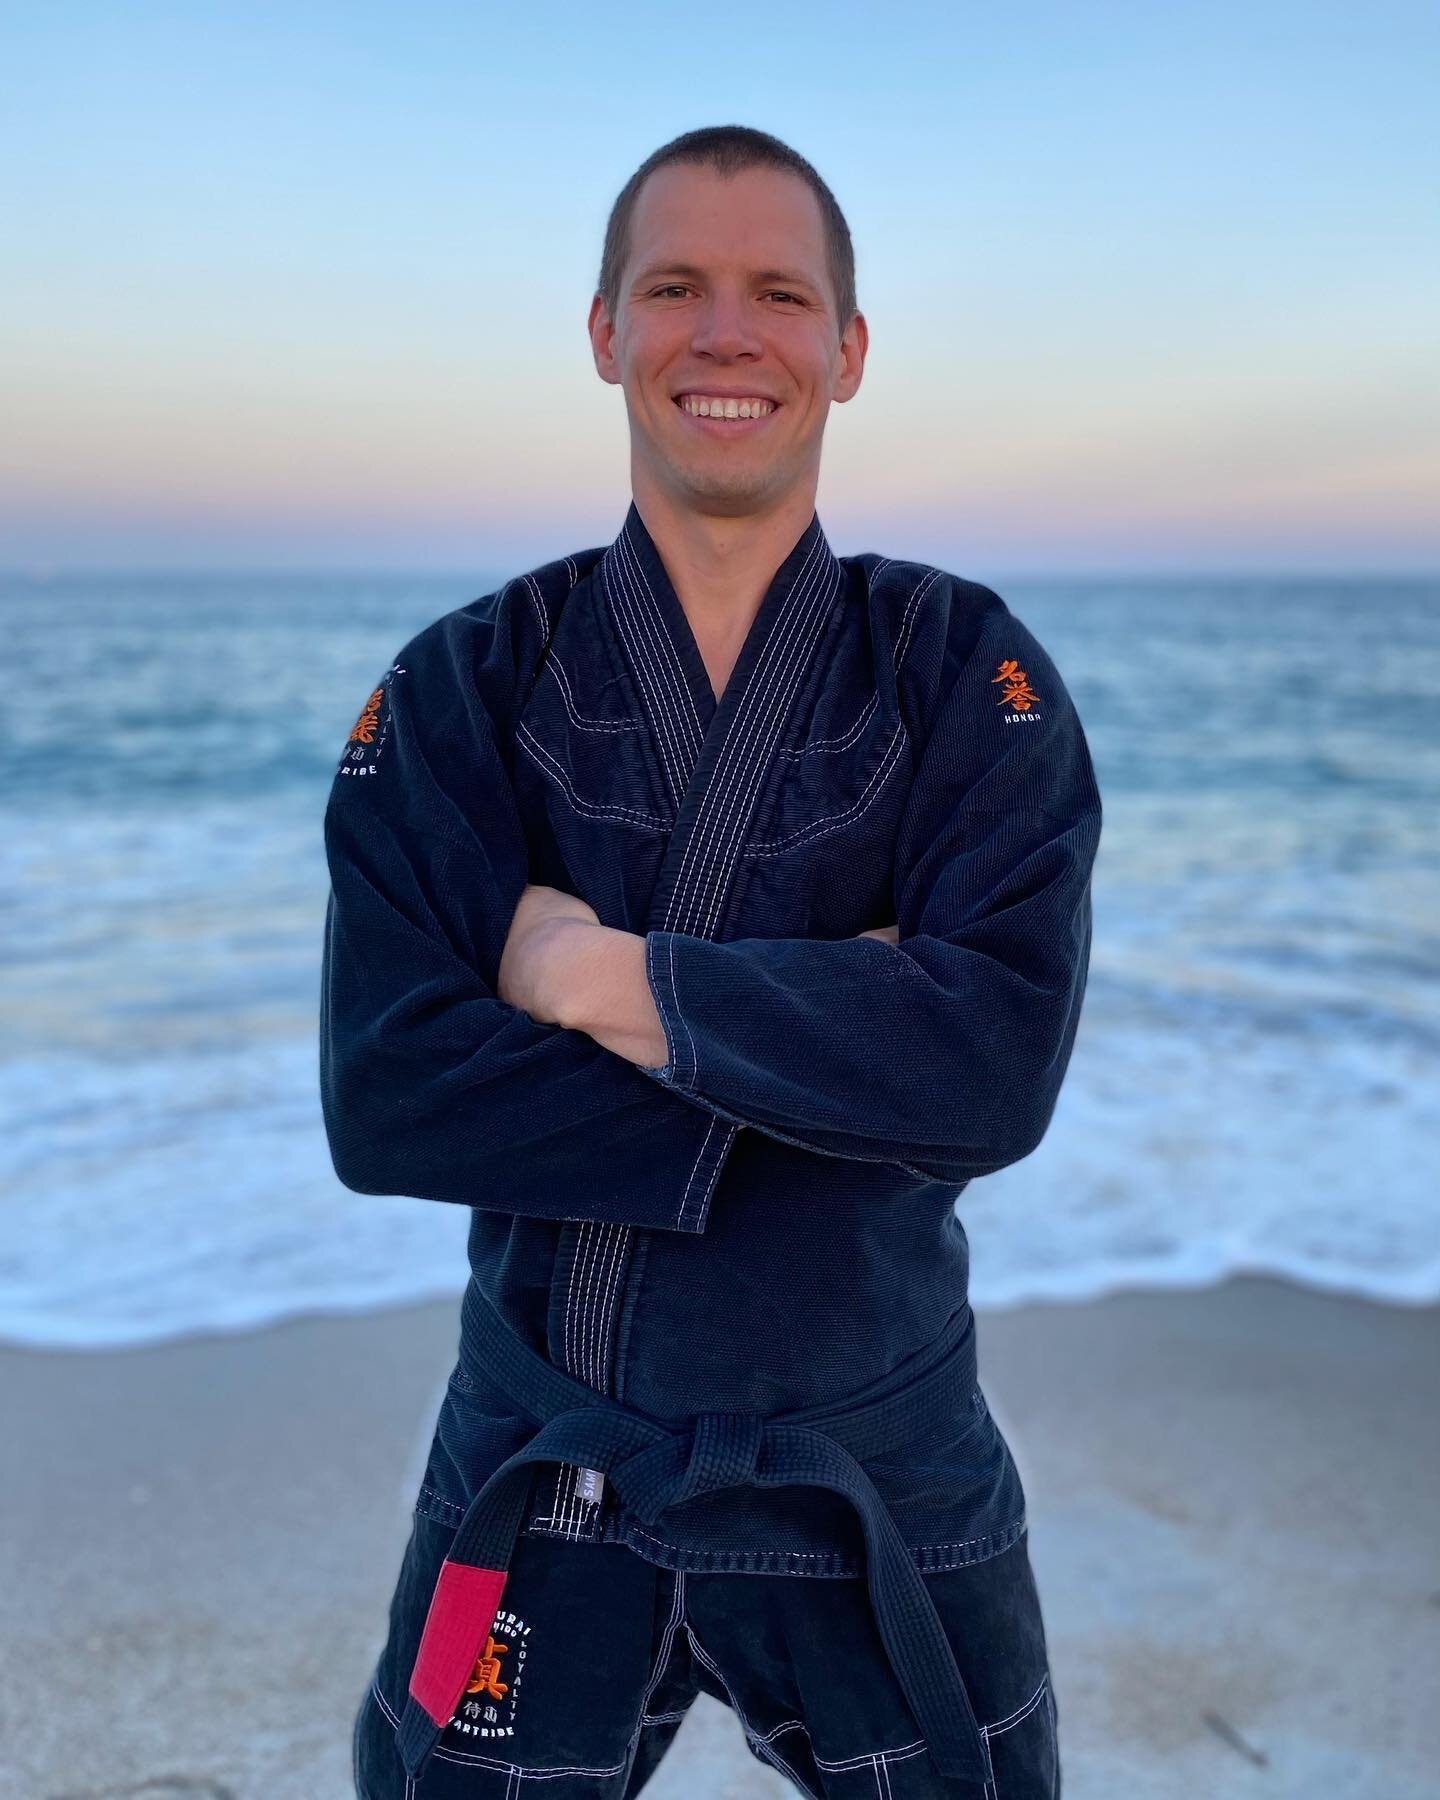 We are working on video content for the website! What would you be more interested in? 

- Strength &amp; Conditioning for Jiu-Jitsu
- Beginner Essentials
- Blue Belt Curriculum
- Beyond the Fundamentals